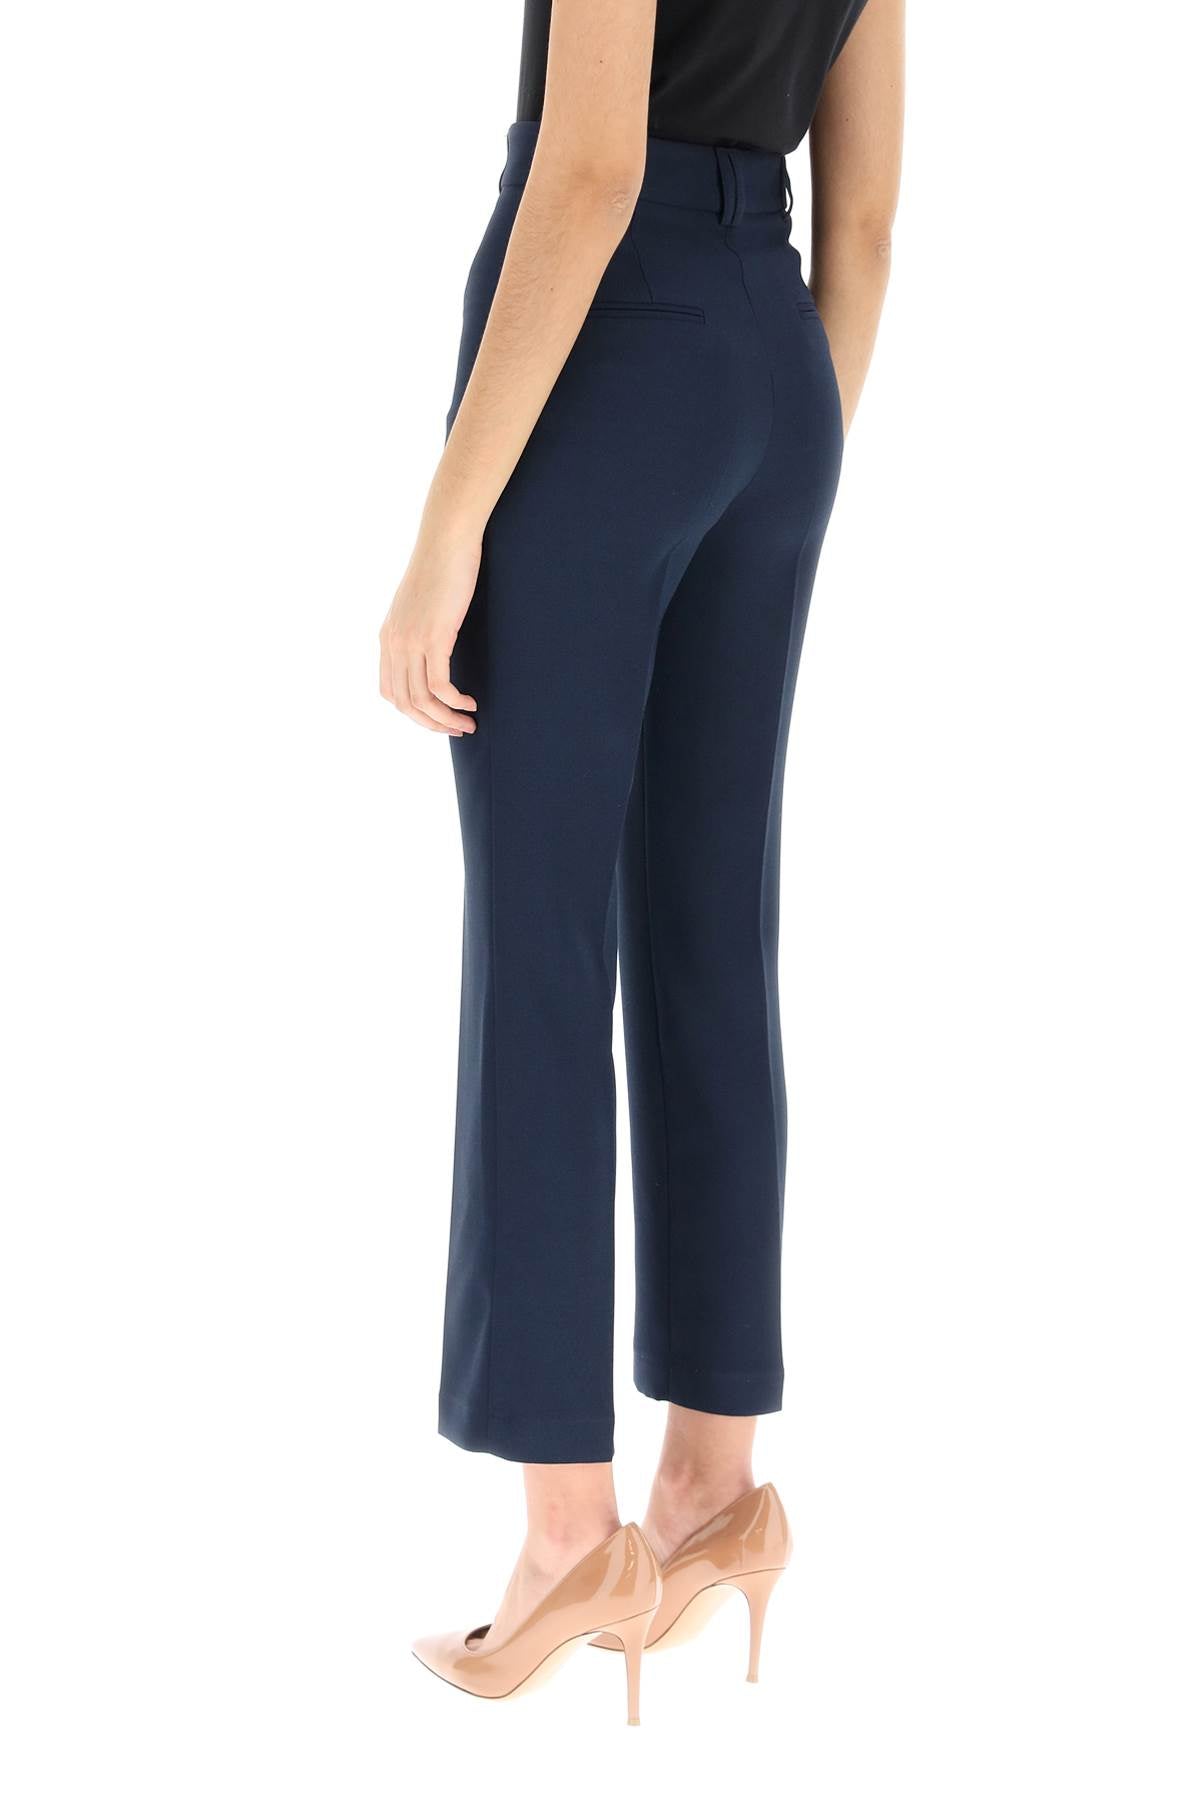 Hebe studio 'loulou' cady trousers-2